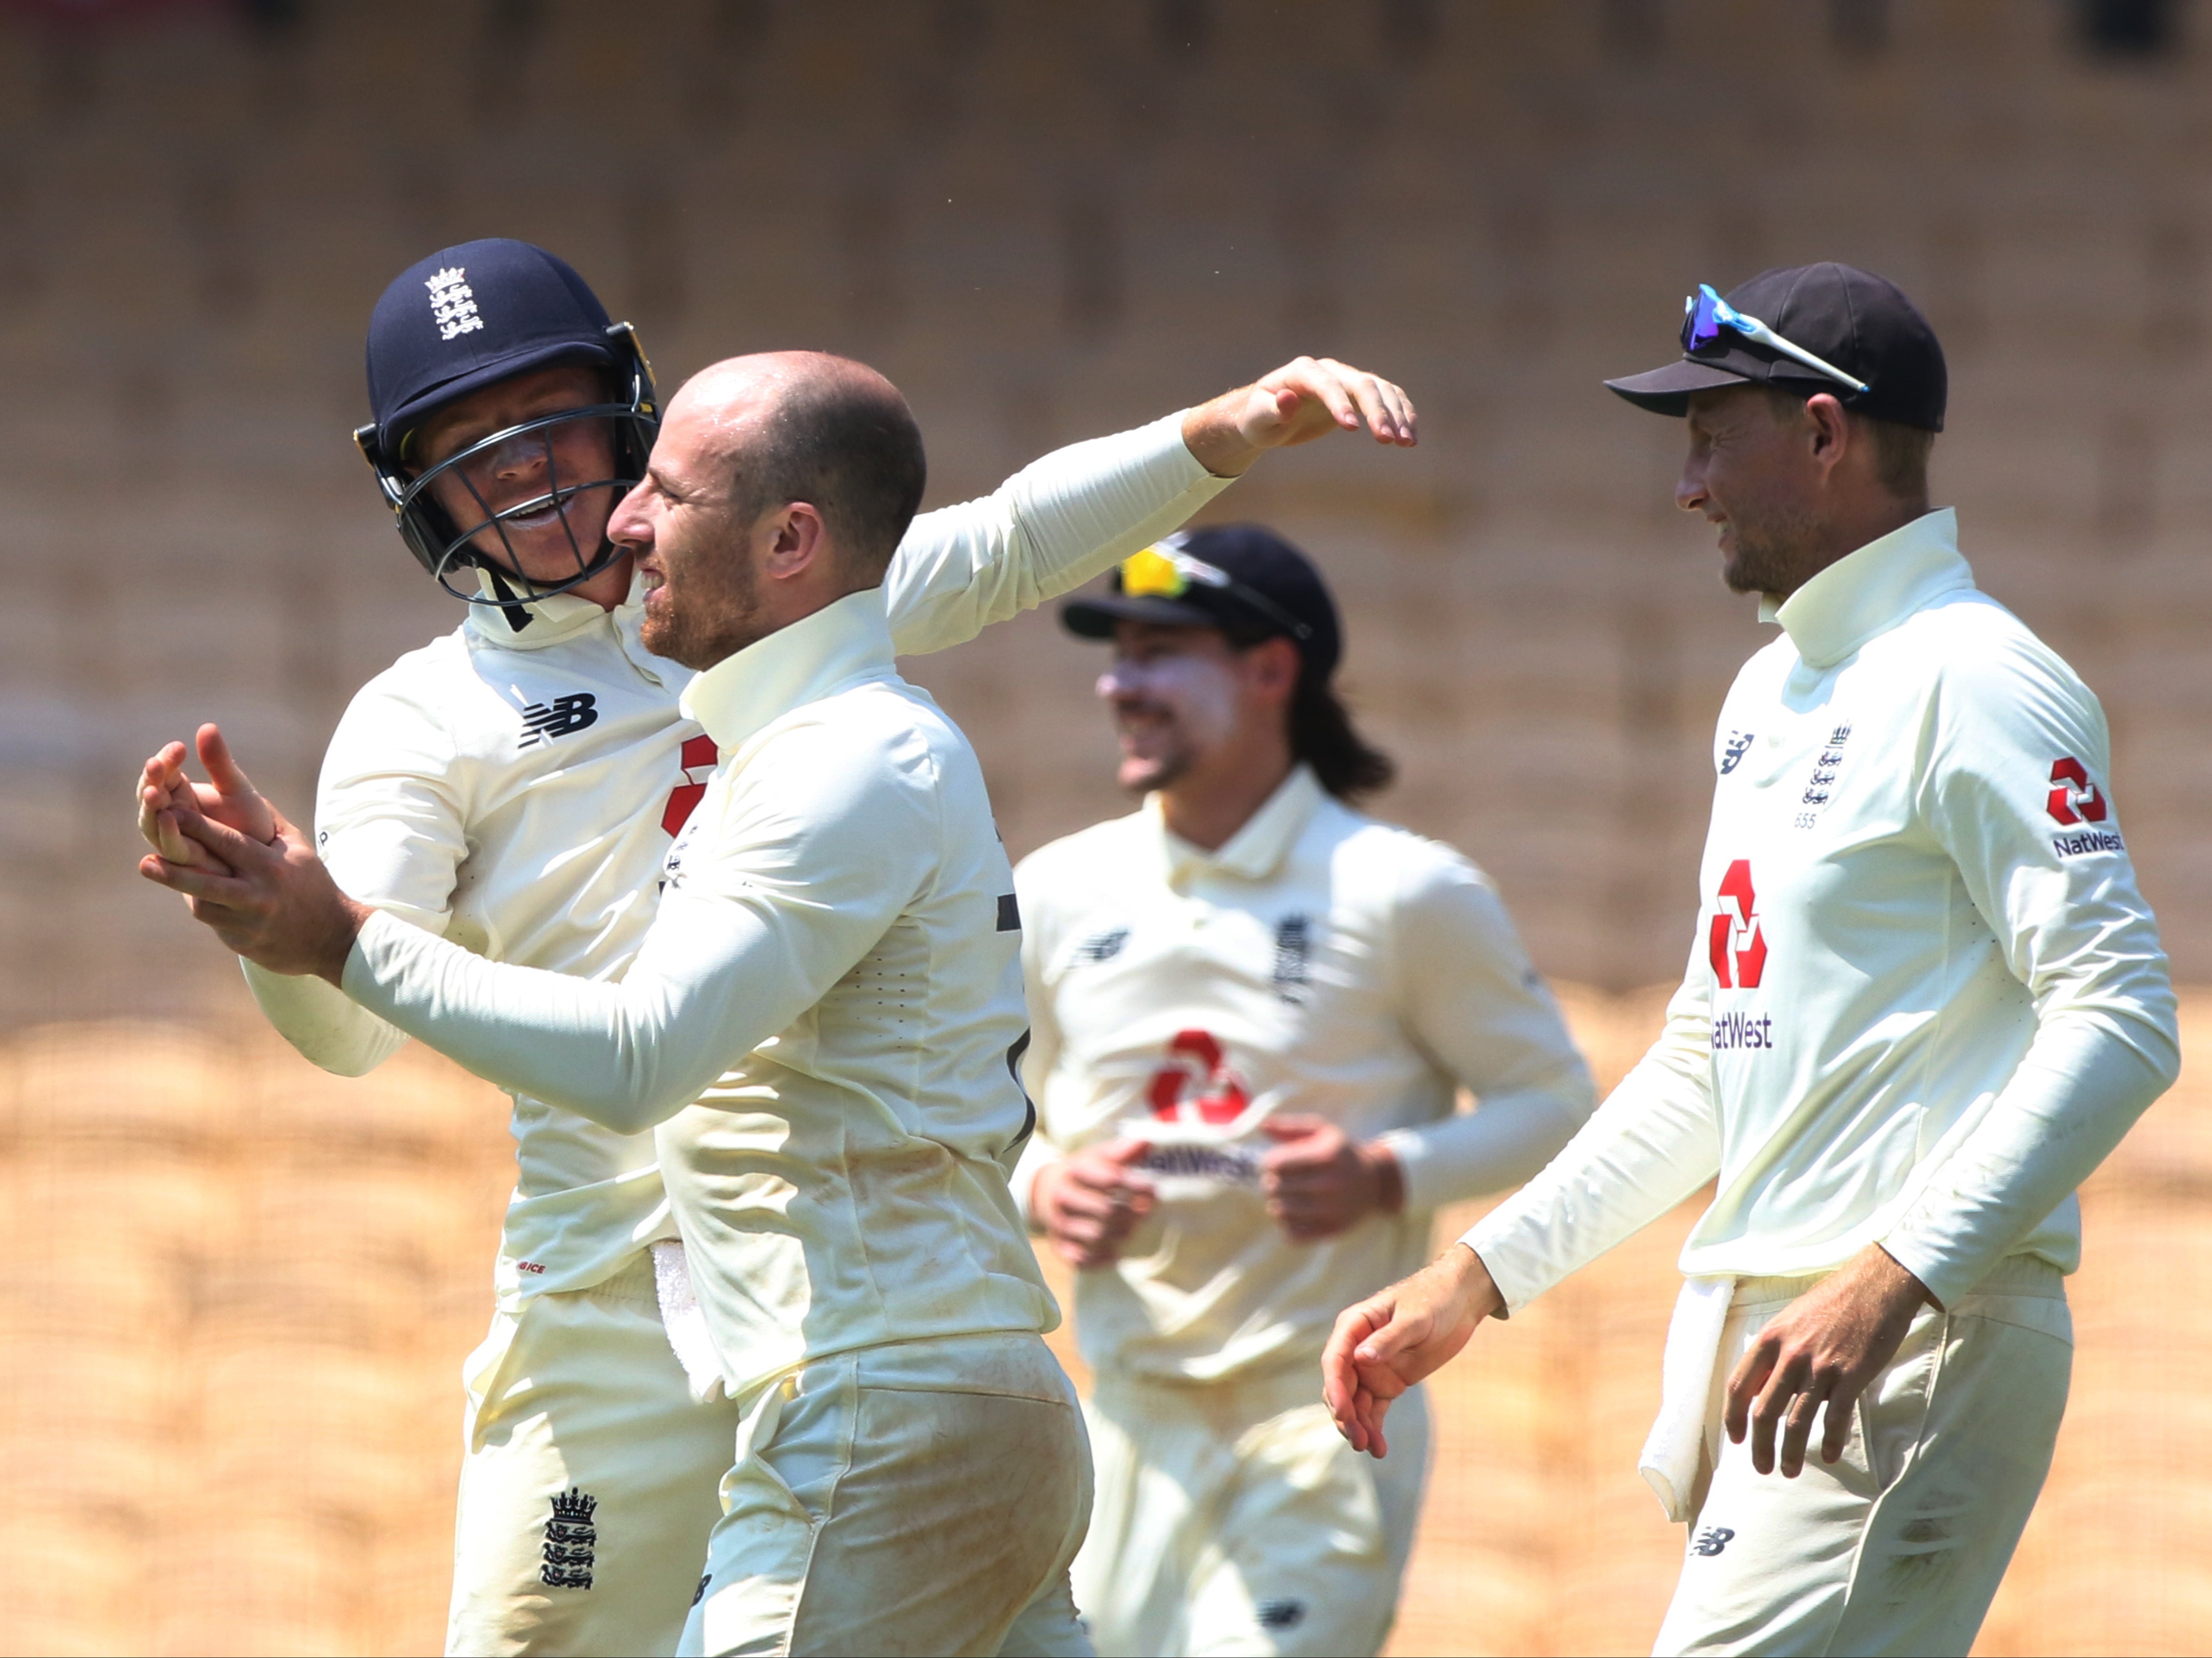 England players celebrate after Jack Leach takes a wicket